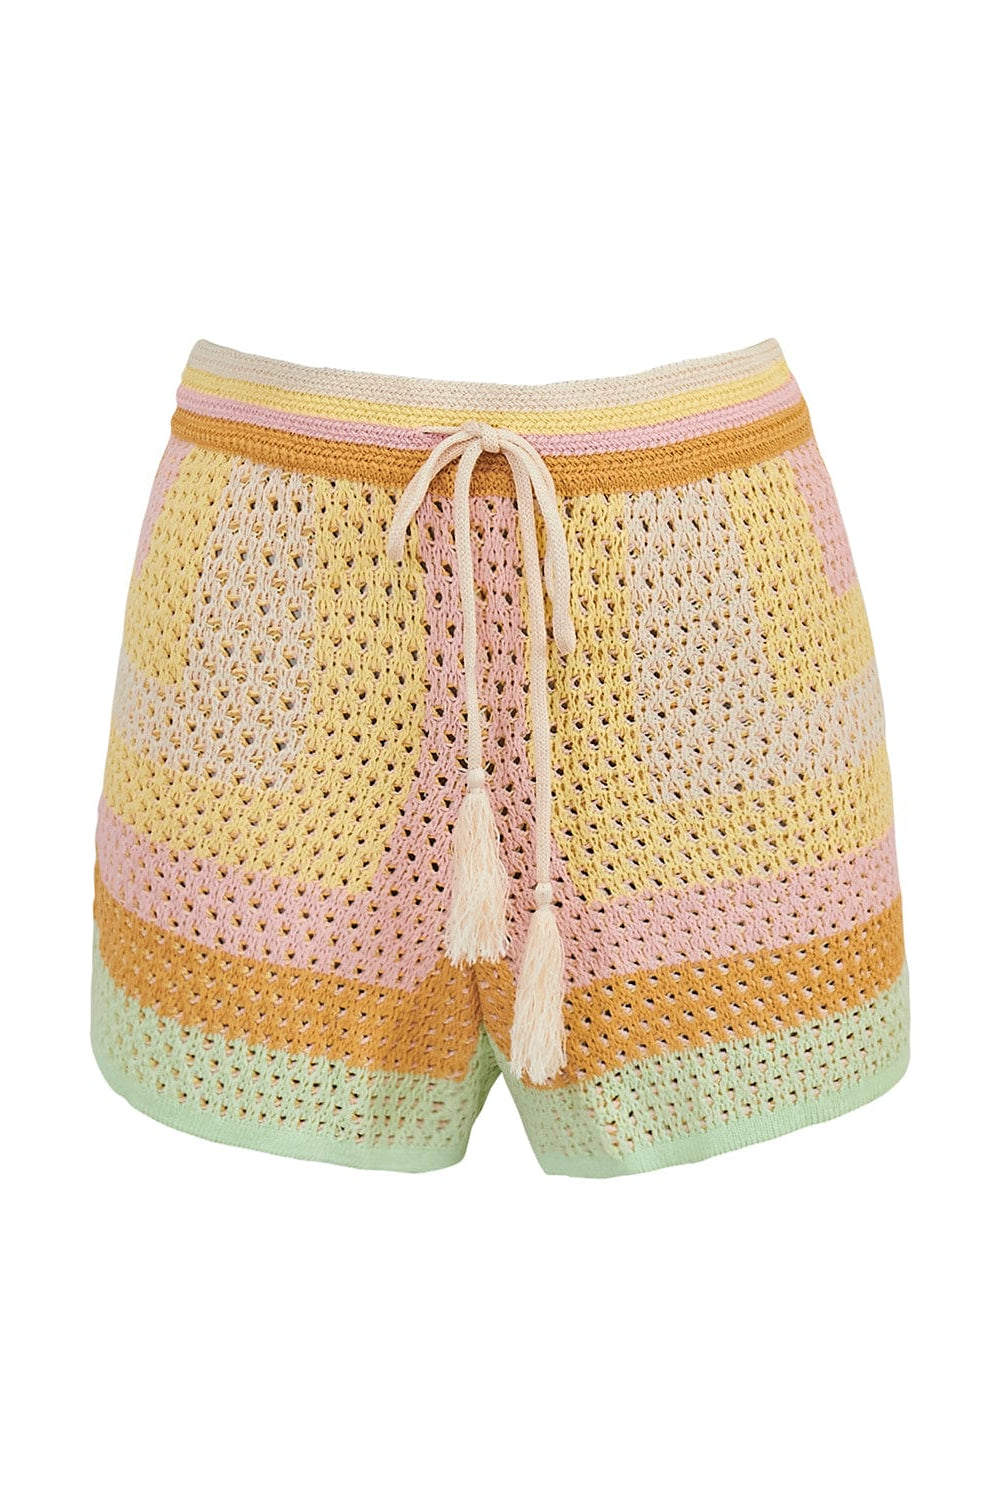 Crochet shorts with a drawstring against a white wall. 